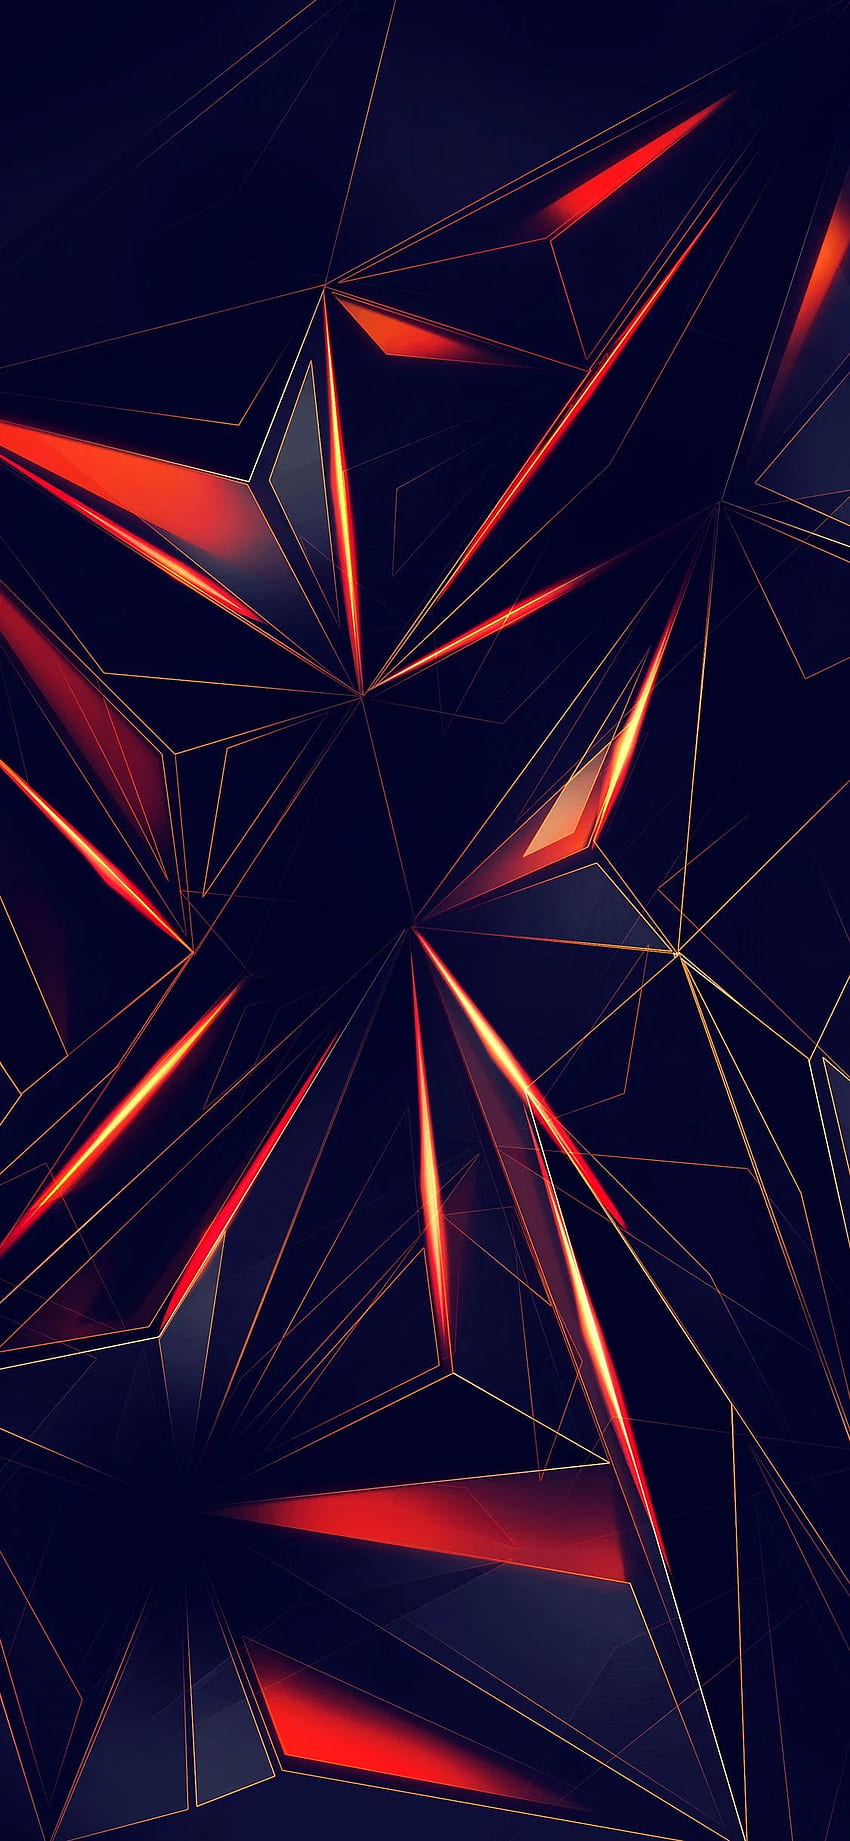 Latest Best iPhone X & Background For Everyone, Red and Blue ...